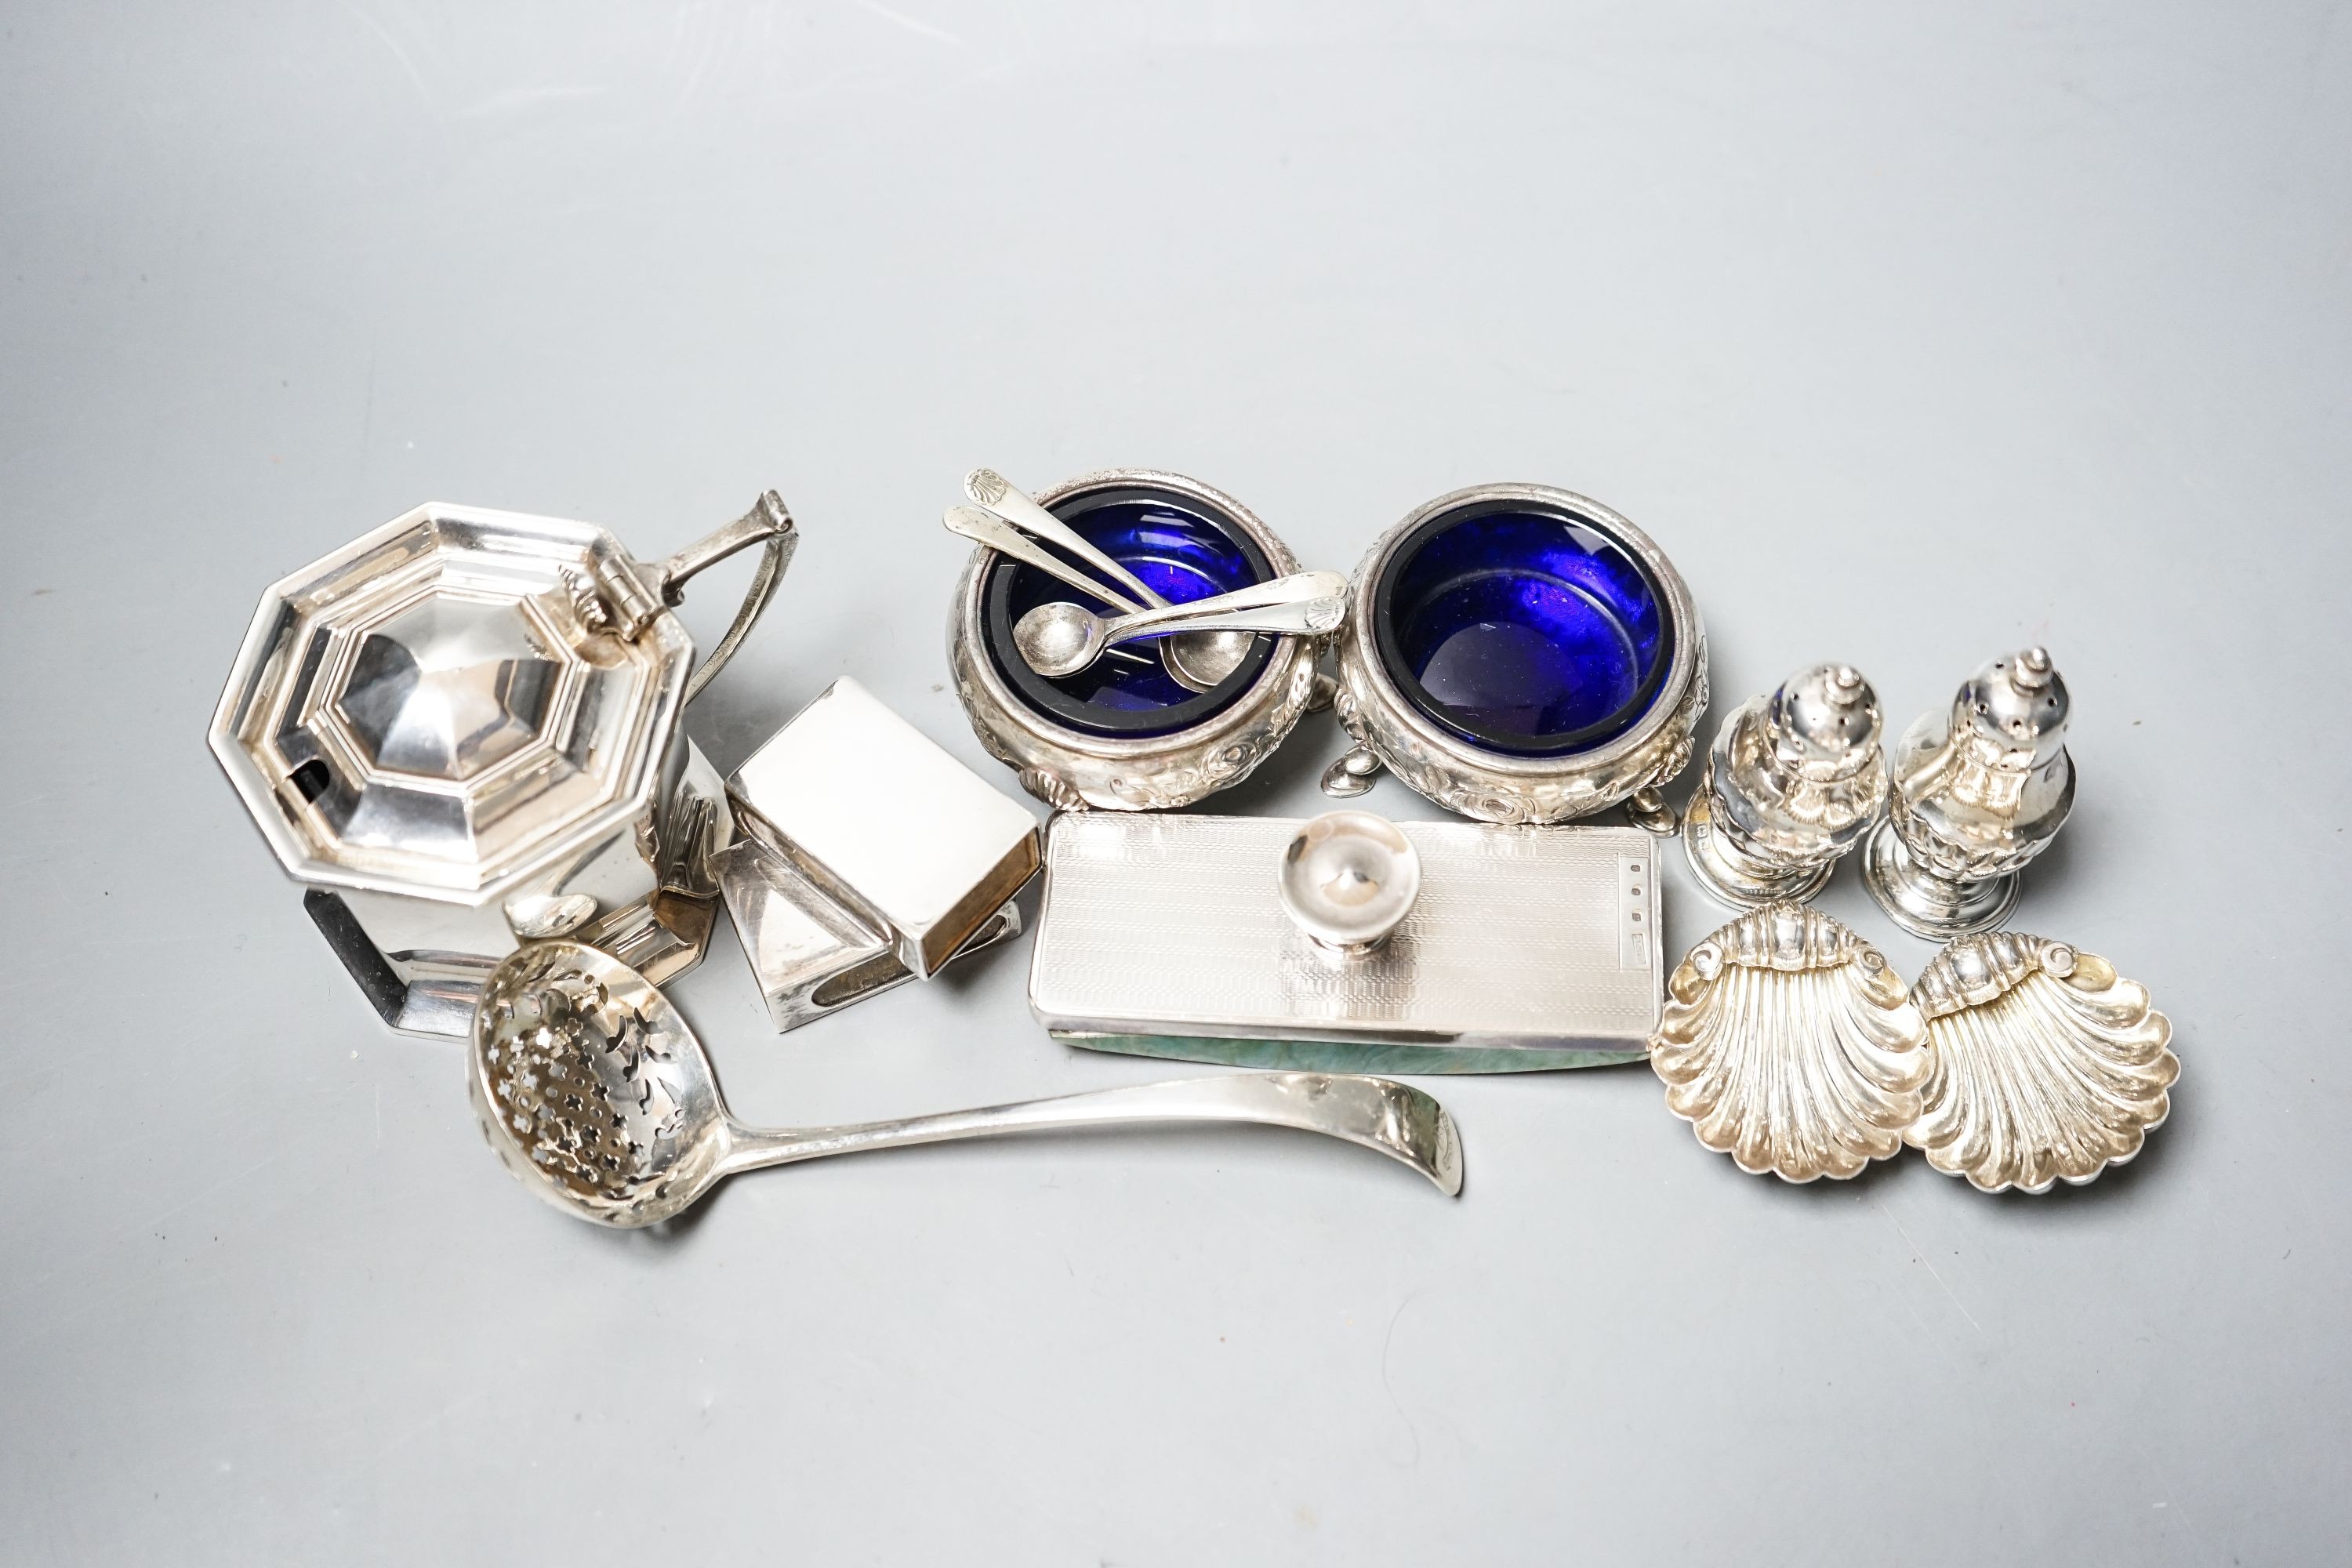 Small silver including a George V silver octagonal mustard, two Victorian bun salts, two shell salts, George III sifter spoon, two condiments, a blotter and two match box sleeves.